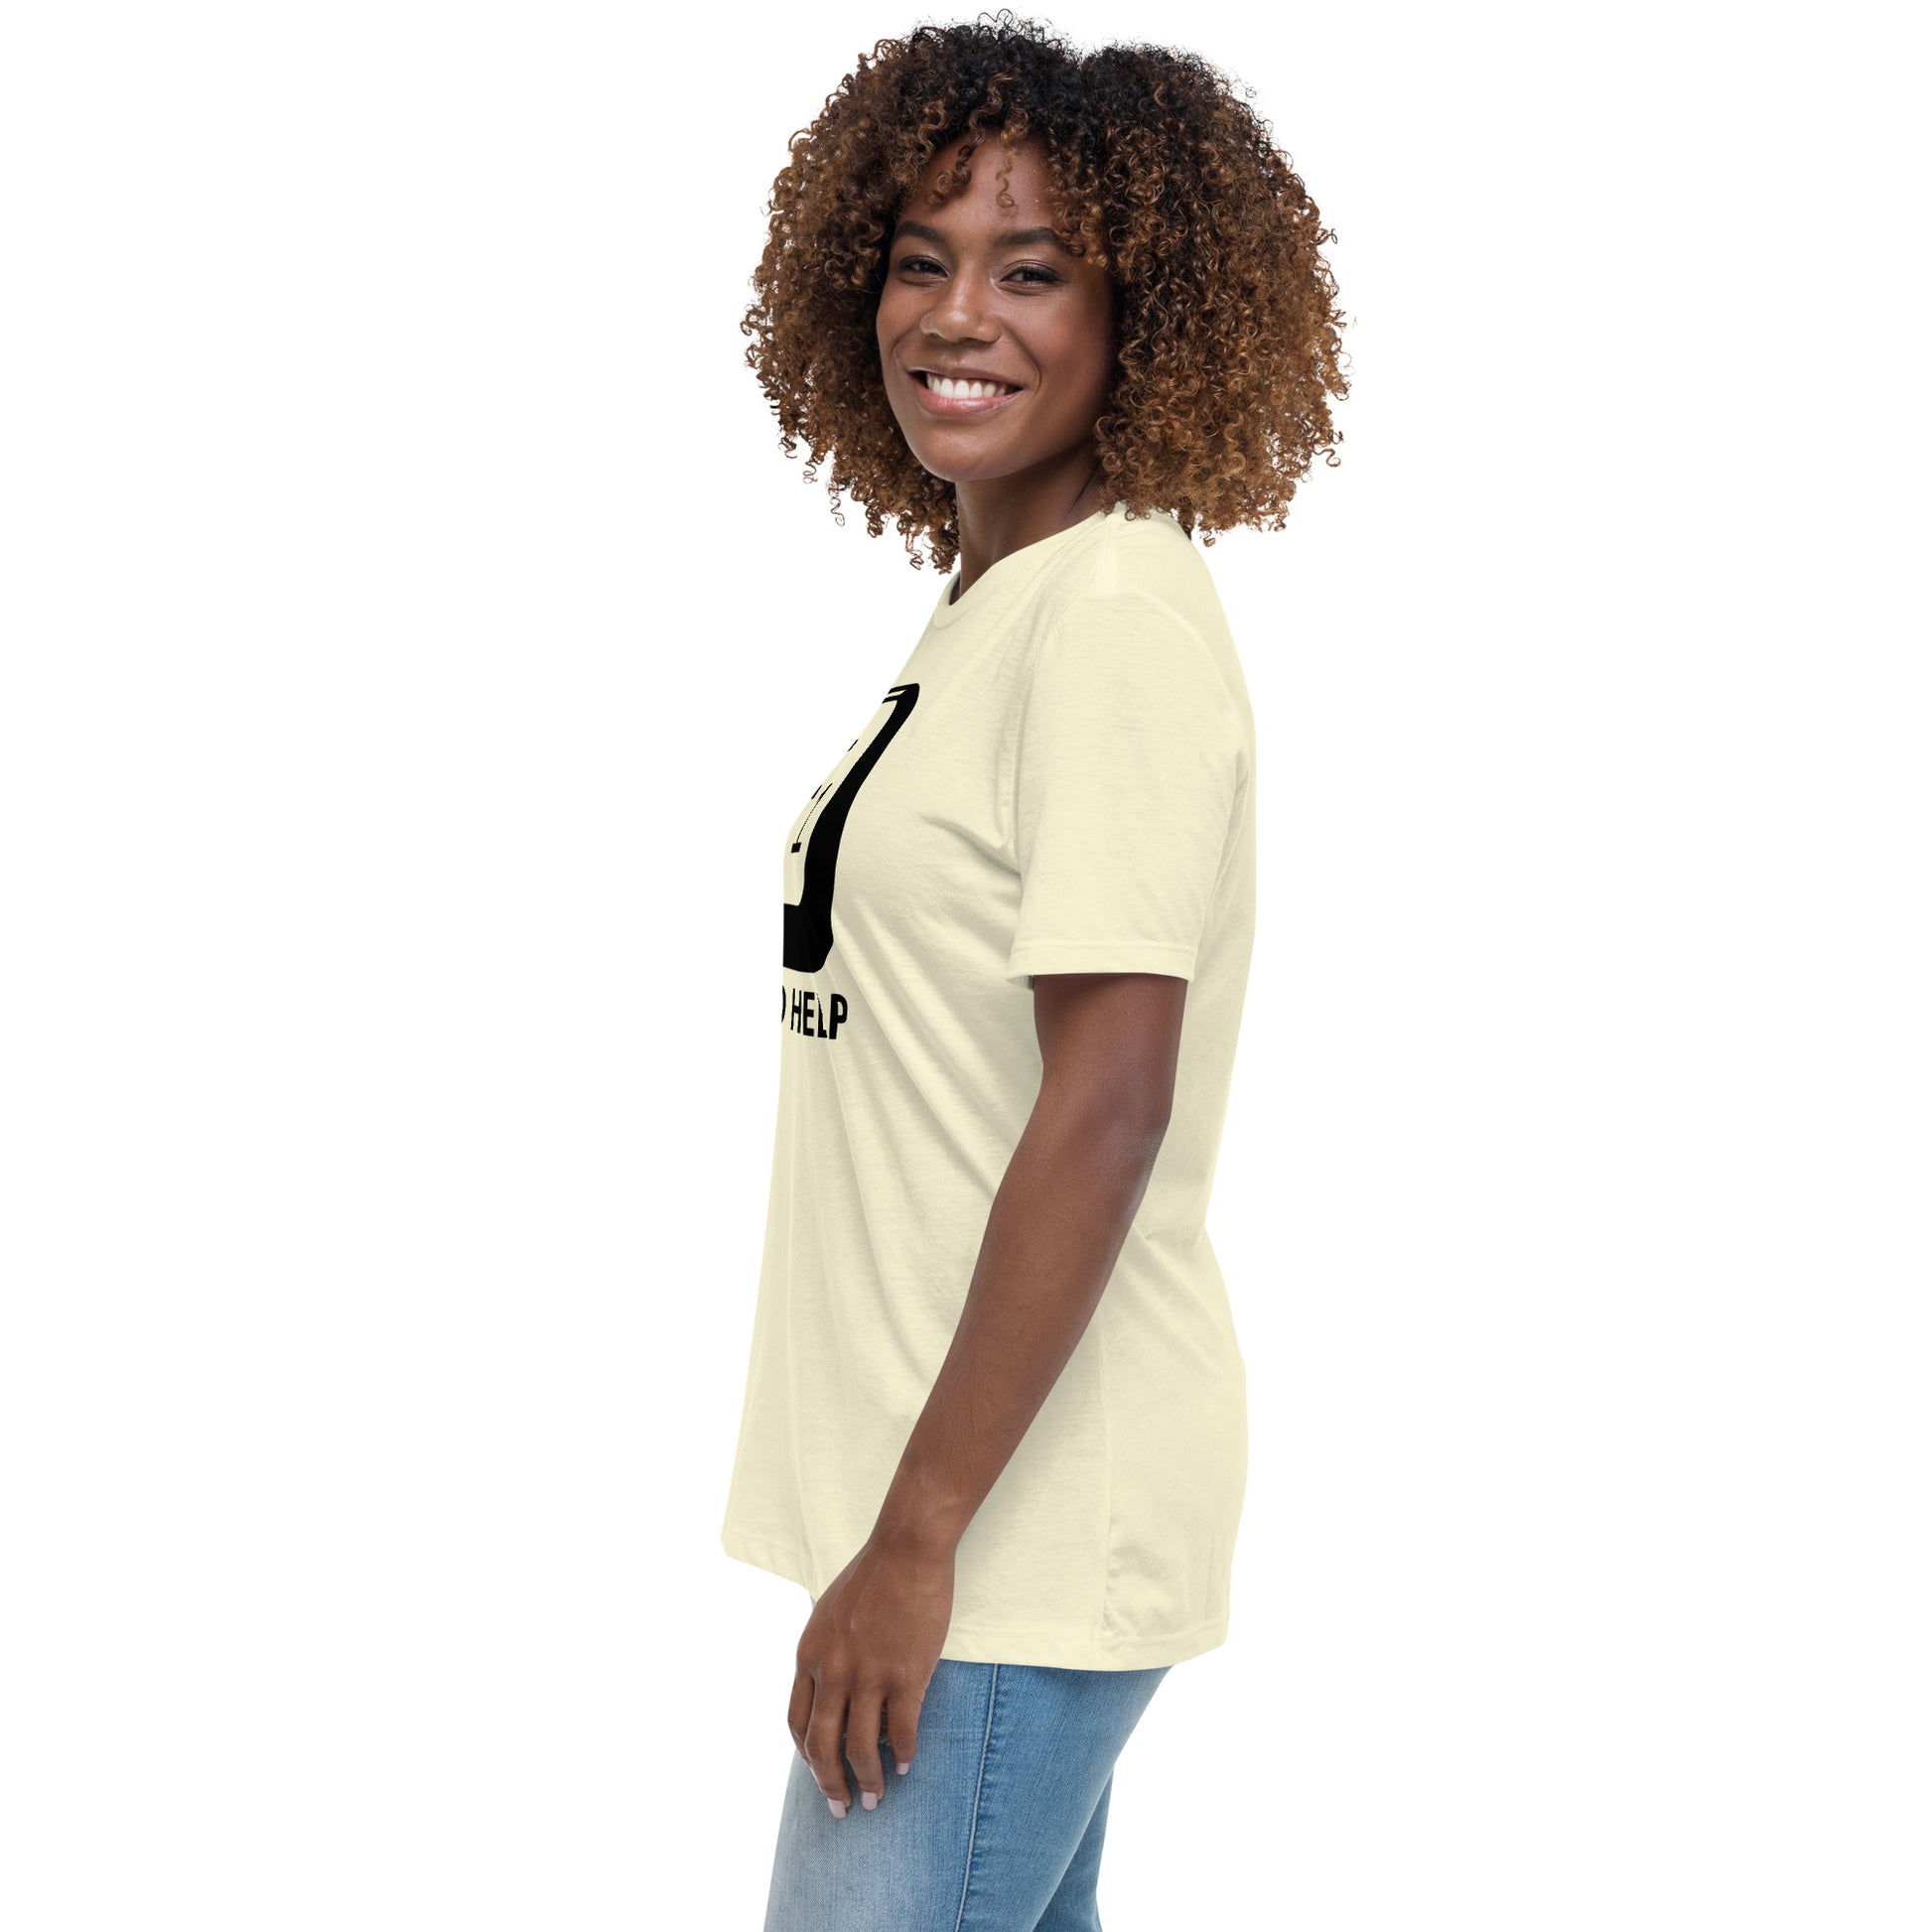 Woman with citron t-shirt with picture of "F1" key and text "I need help"